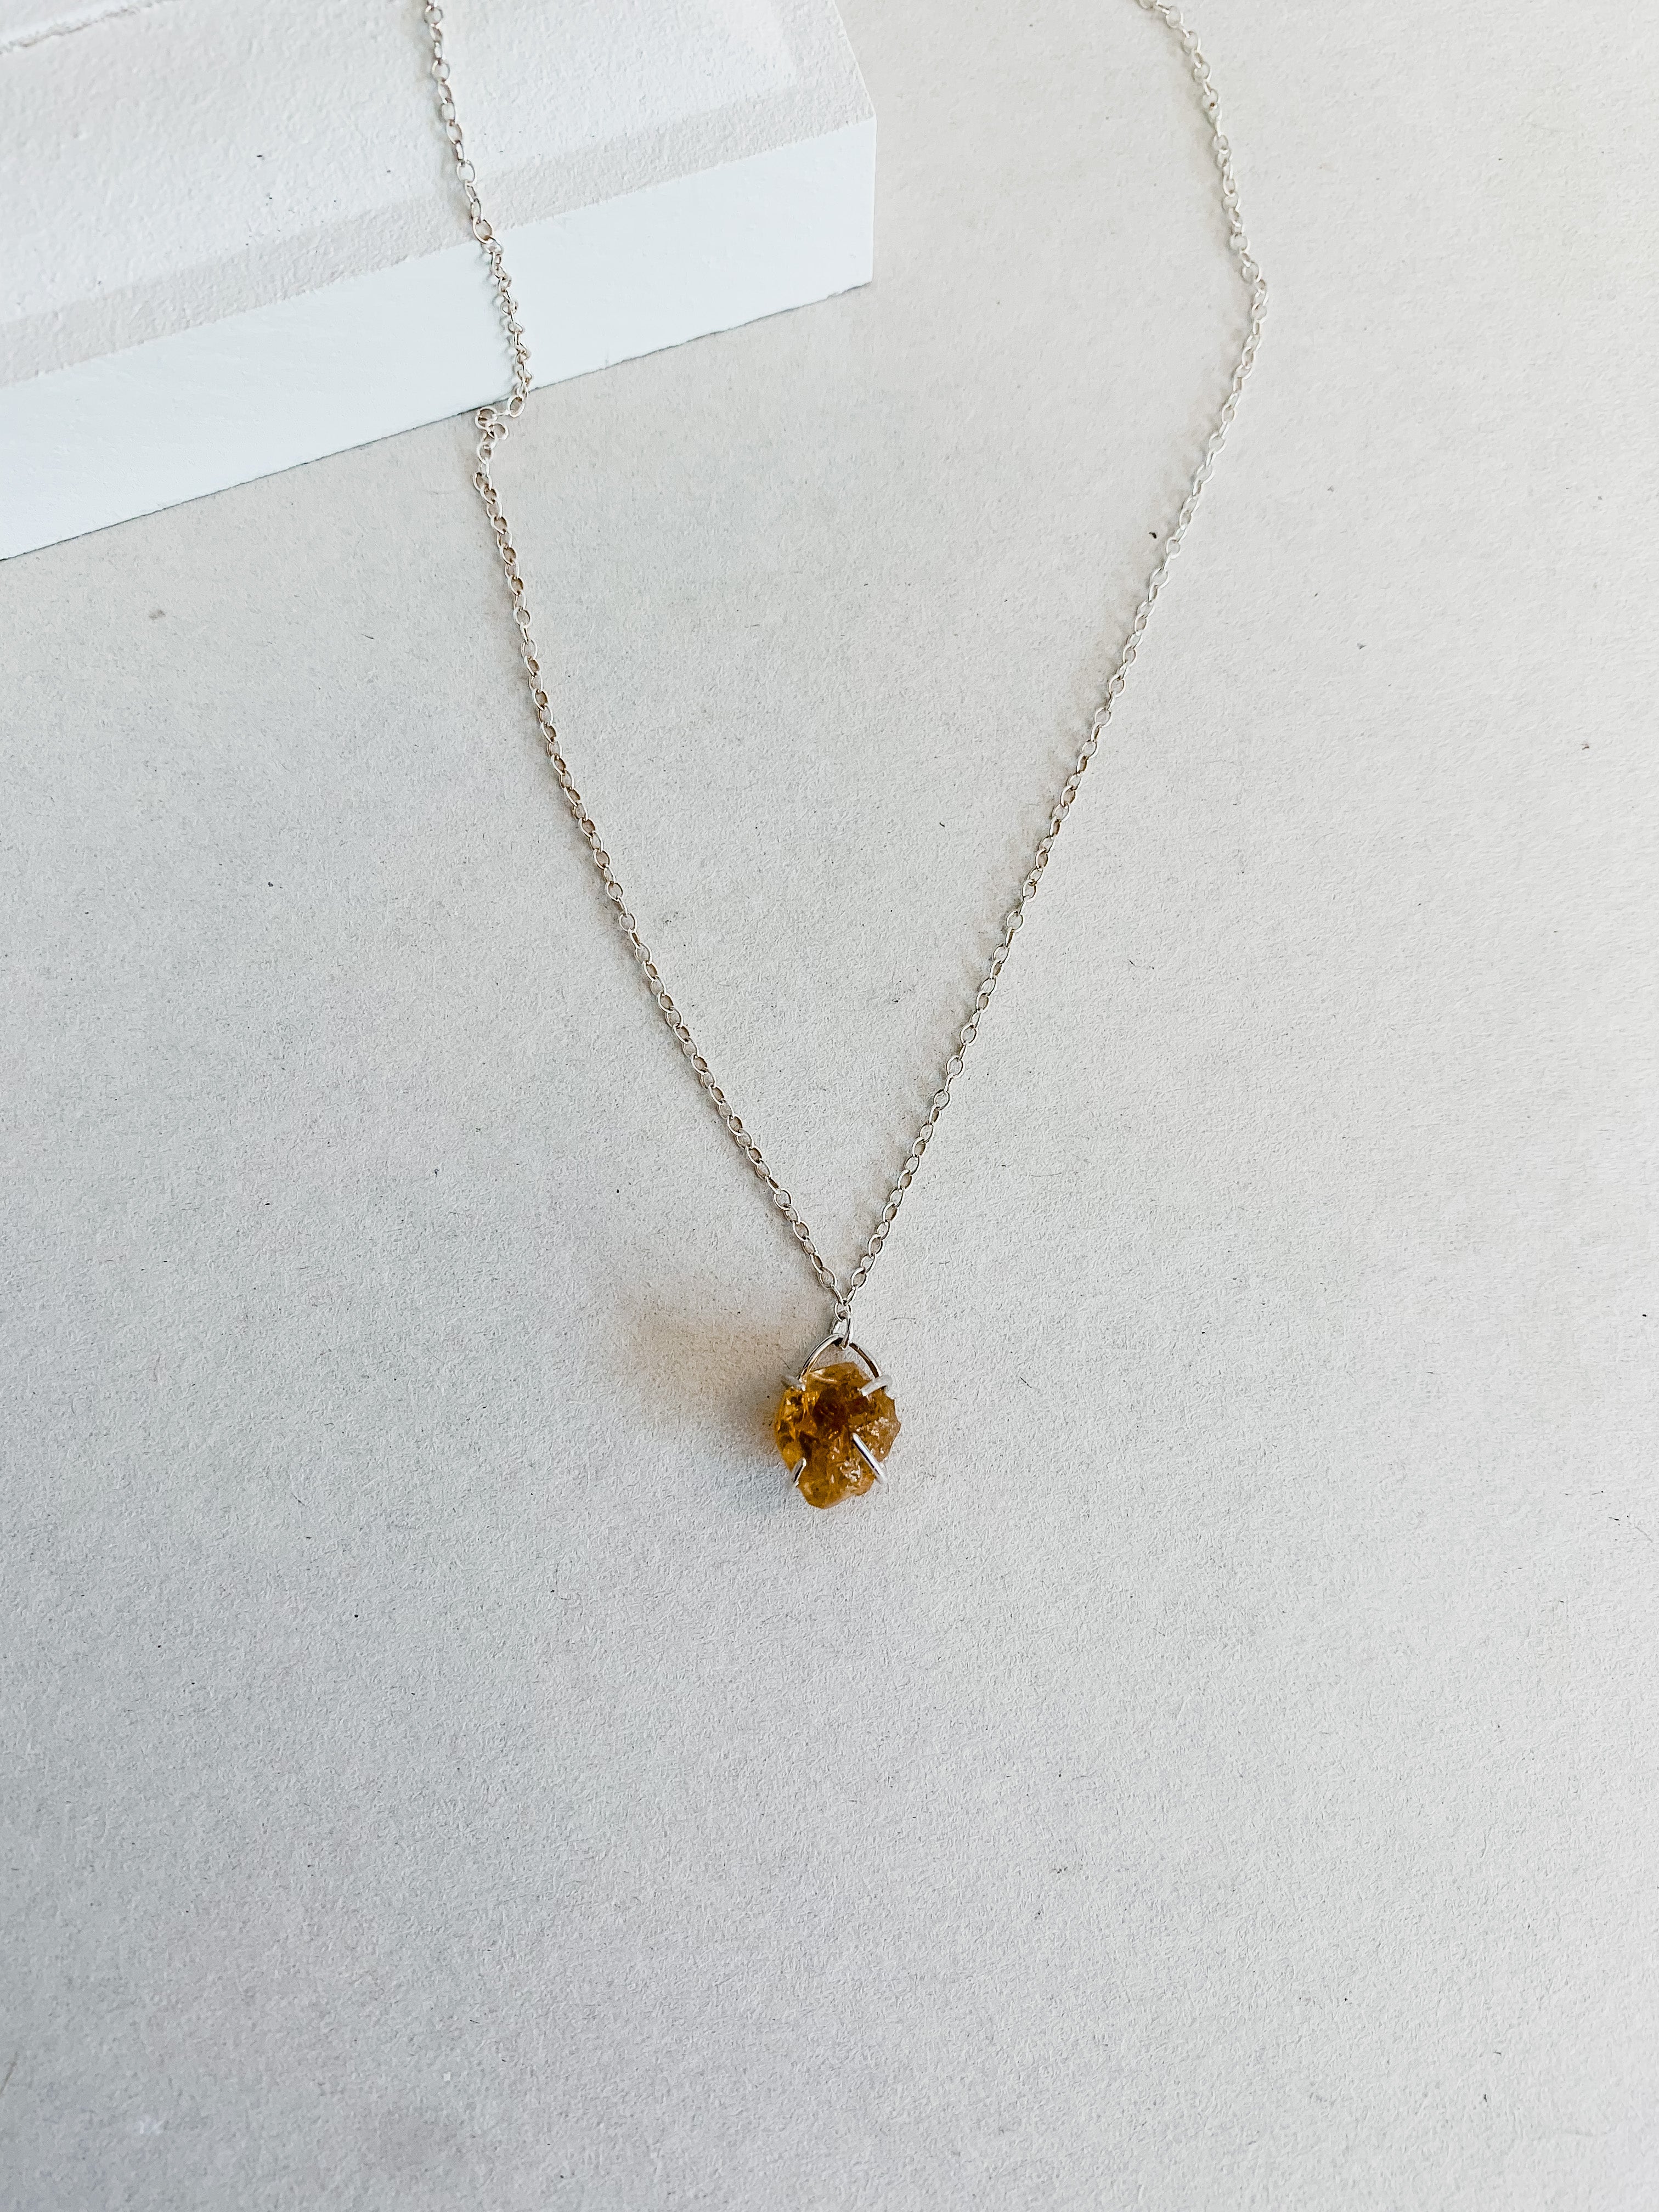 Natural Raw Citrine Gemstone 925 Sterling Silver Pendant Necklace With Box  Chain